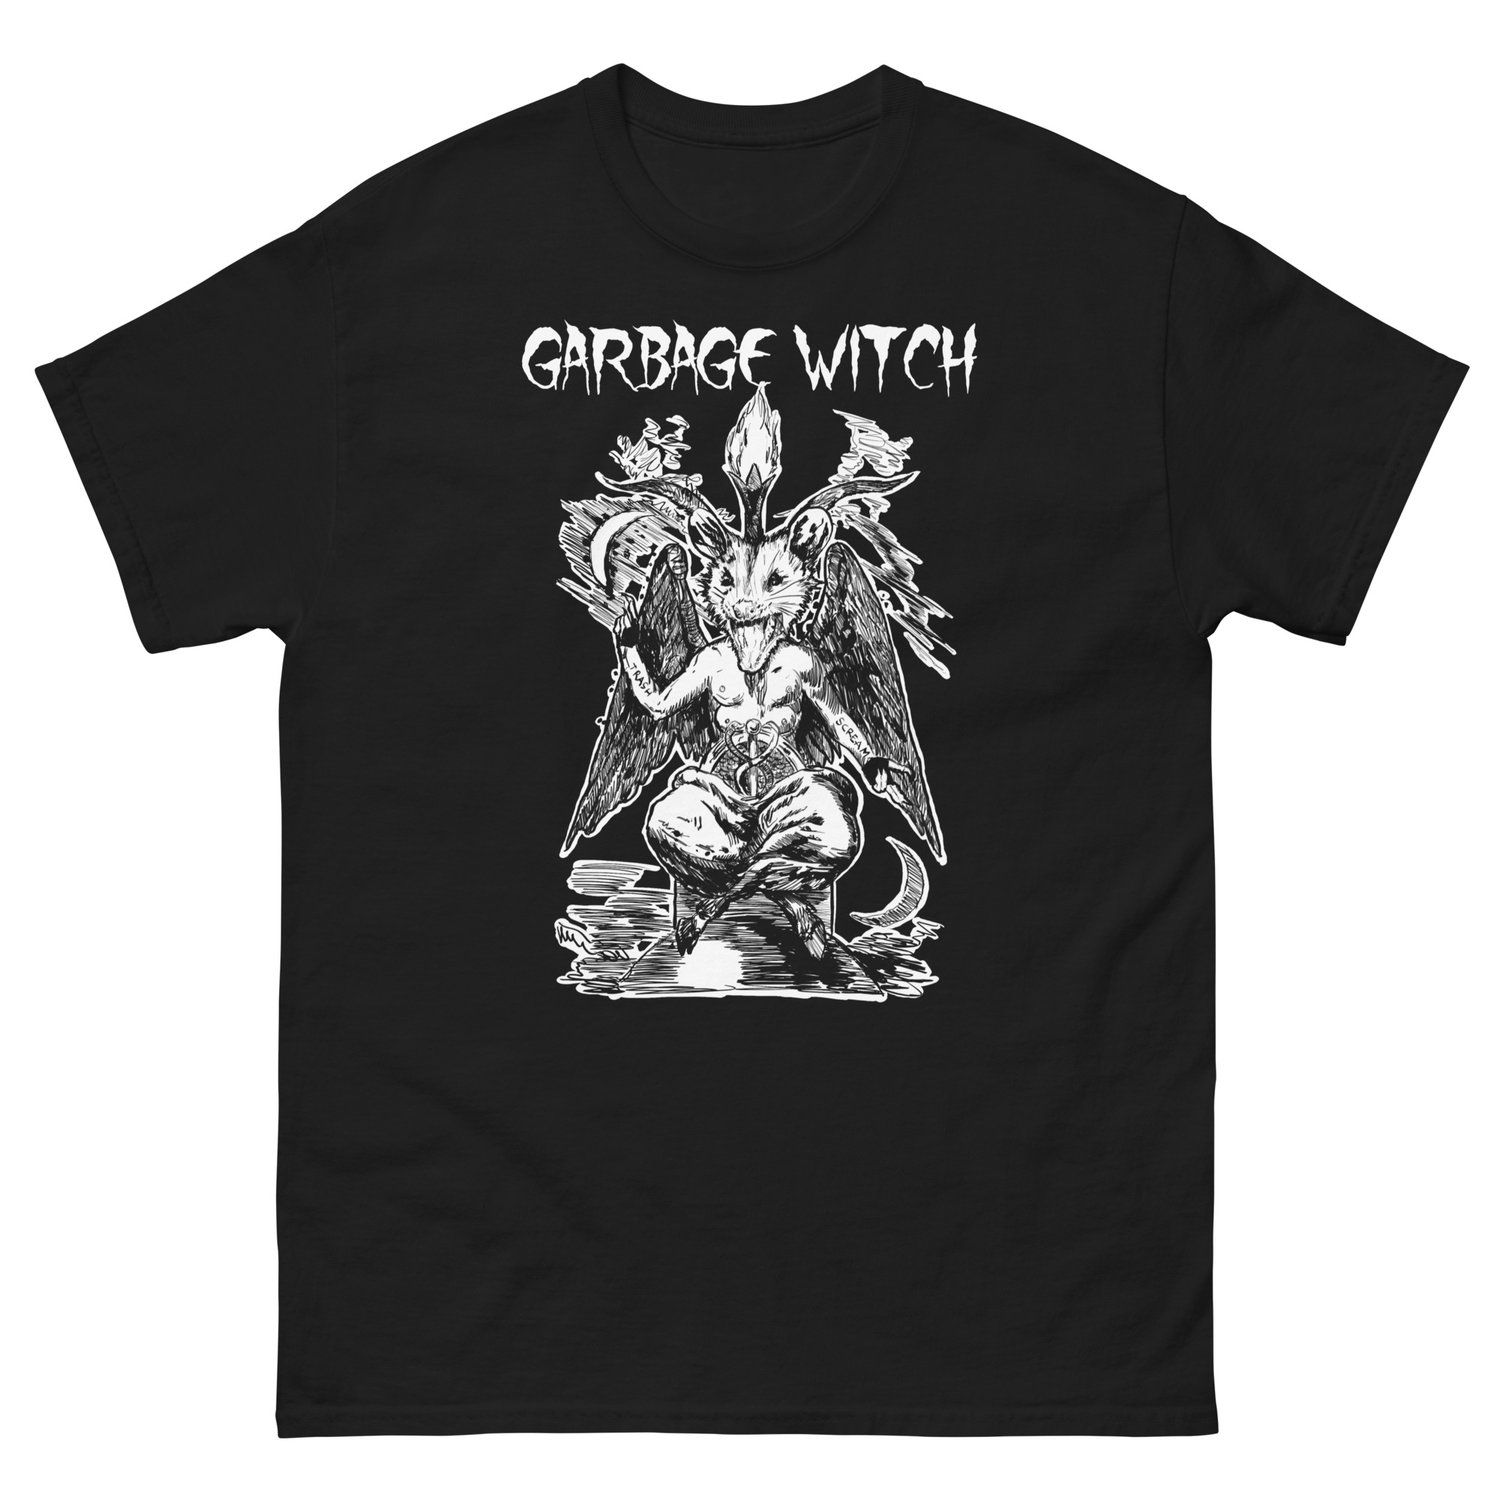 Garbage Witch - Baphomet! 